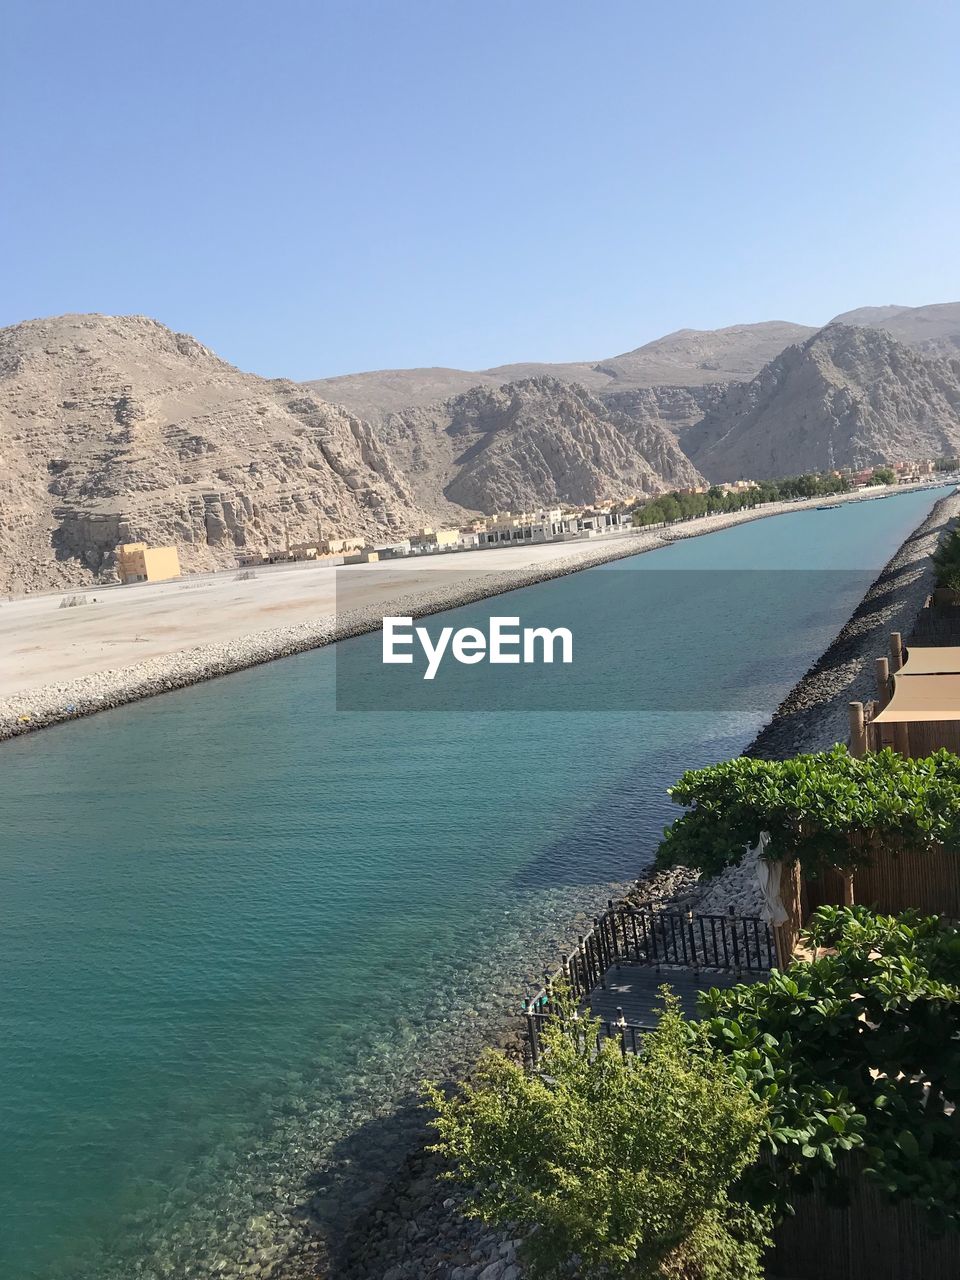 SCENIC VIEW OF RIVER AGAINST CLEAR SKY